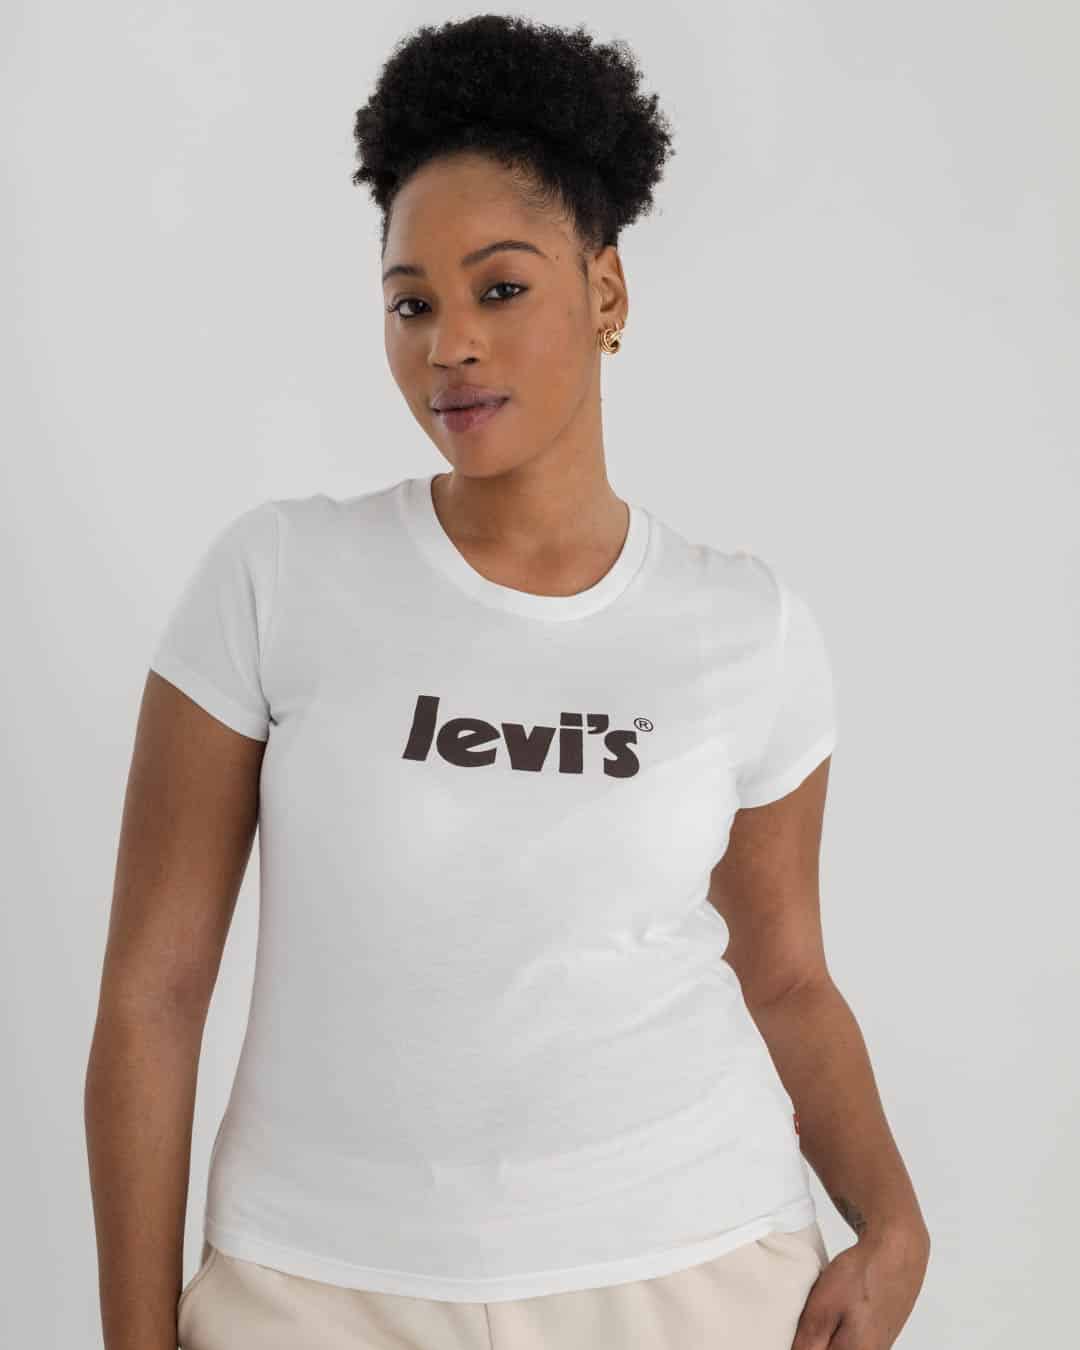 mid shot of woman wearing white Levi's t-shirt with Levi's logo on chest in black